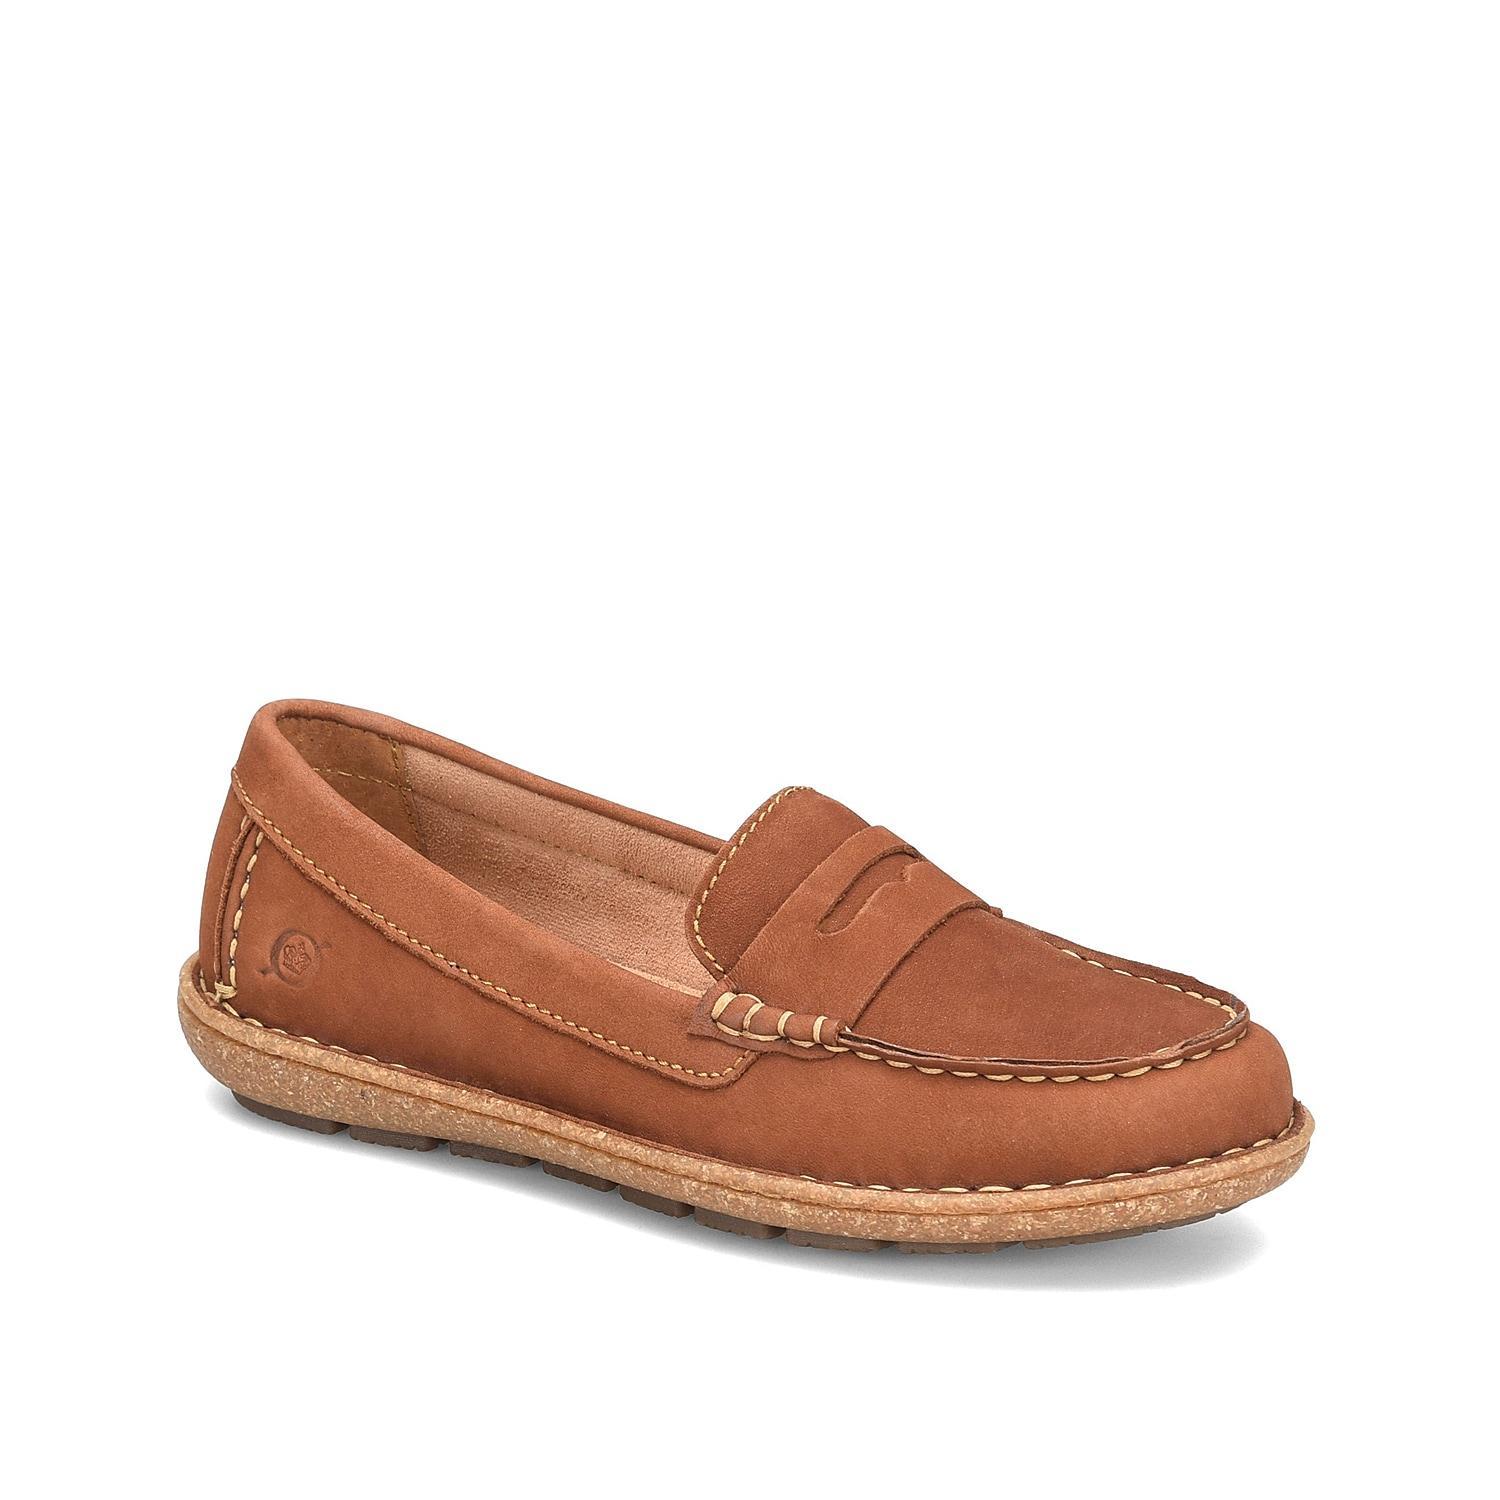 Born Nerina Suede Penny Loafers Product Image